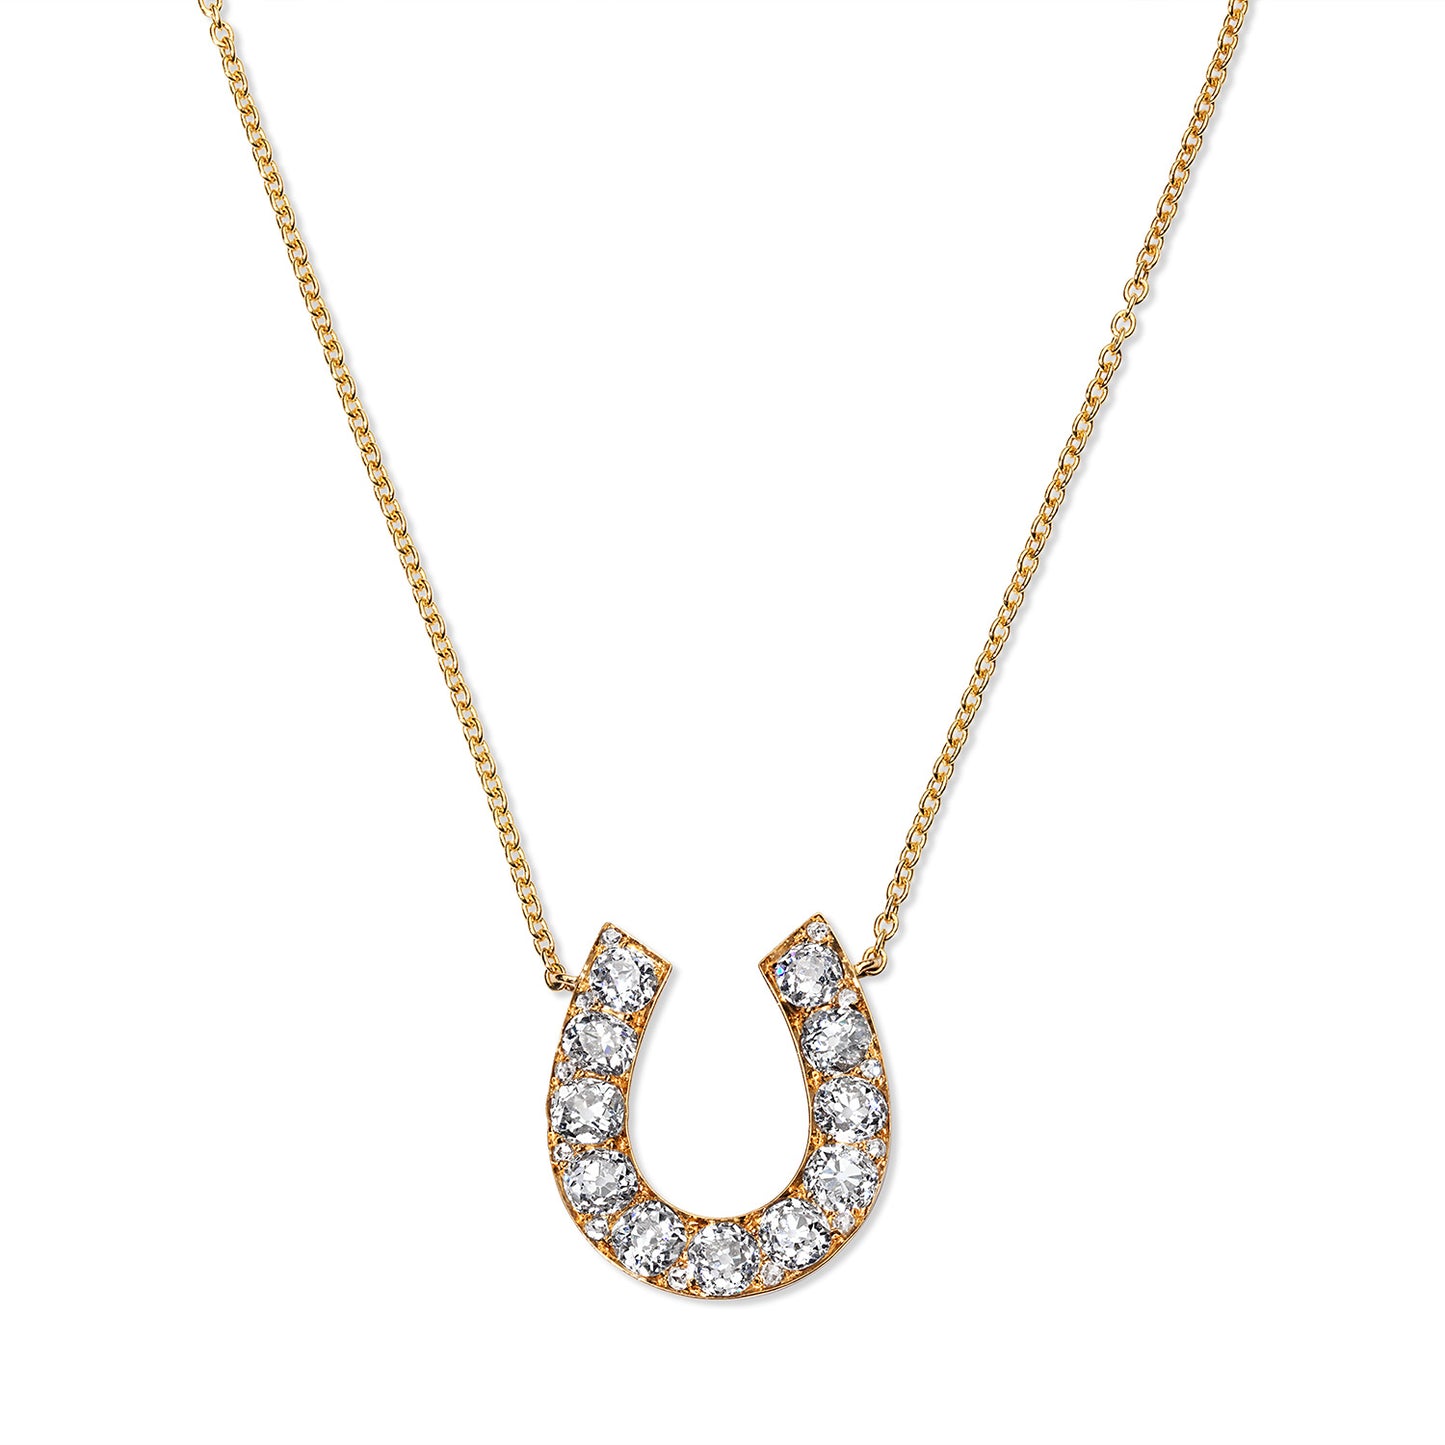 Unique 18 karat yellow gold antique horseshoe pendant, curated by Susan L. Kottemann in New York. Features eleven .25 carat miner cut diamonds, originally a brooch transformed into a stunning pendant, perfect for any collection